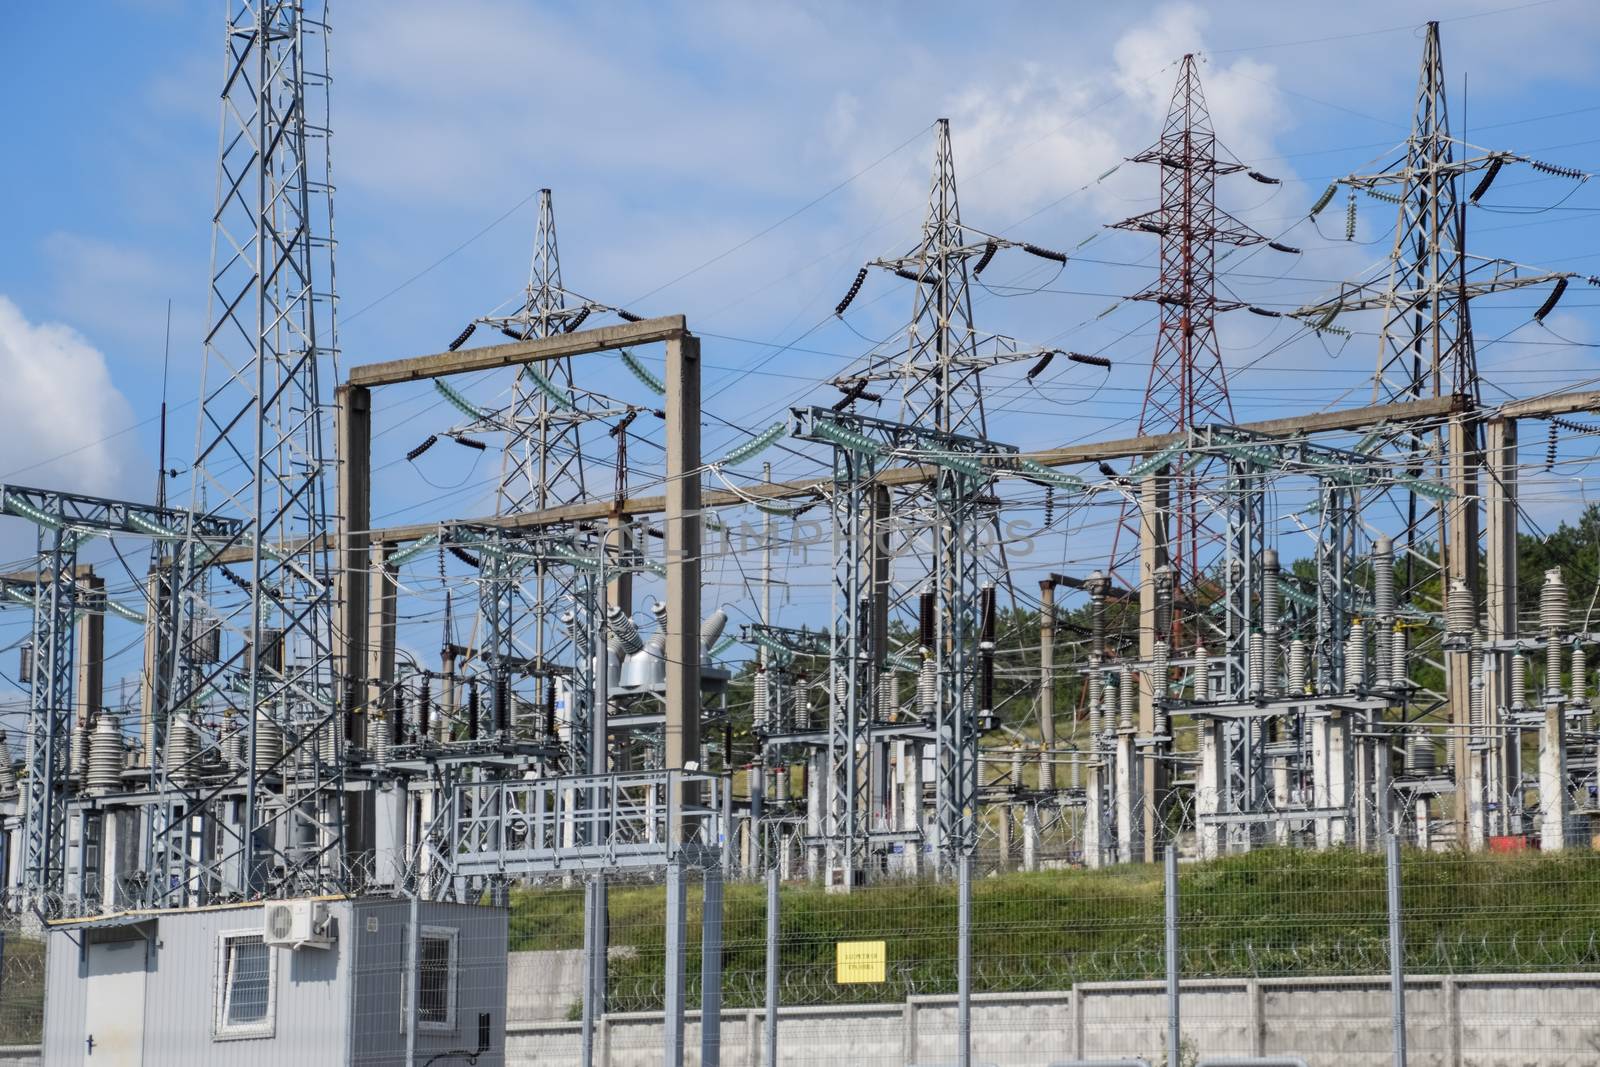 a Power substation equipment, transformers and wire poles.